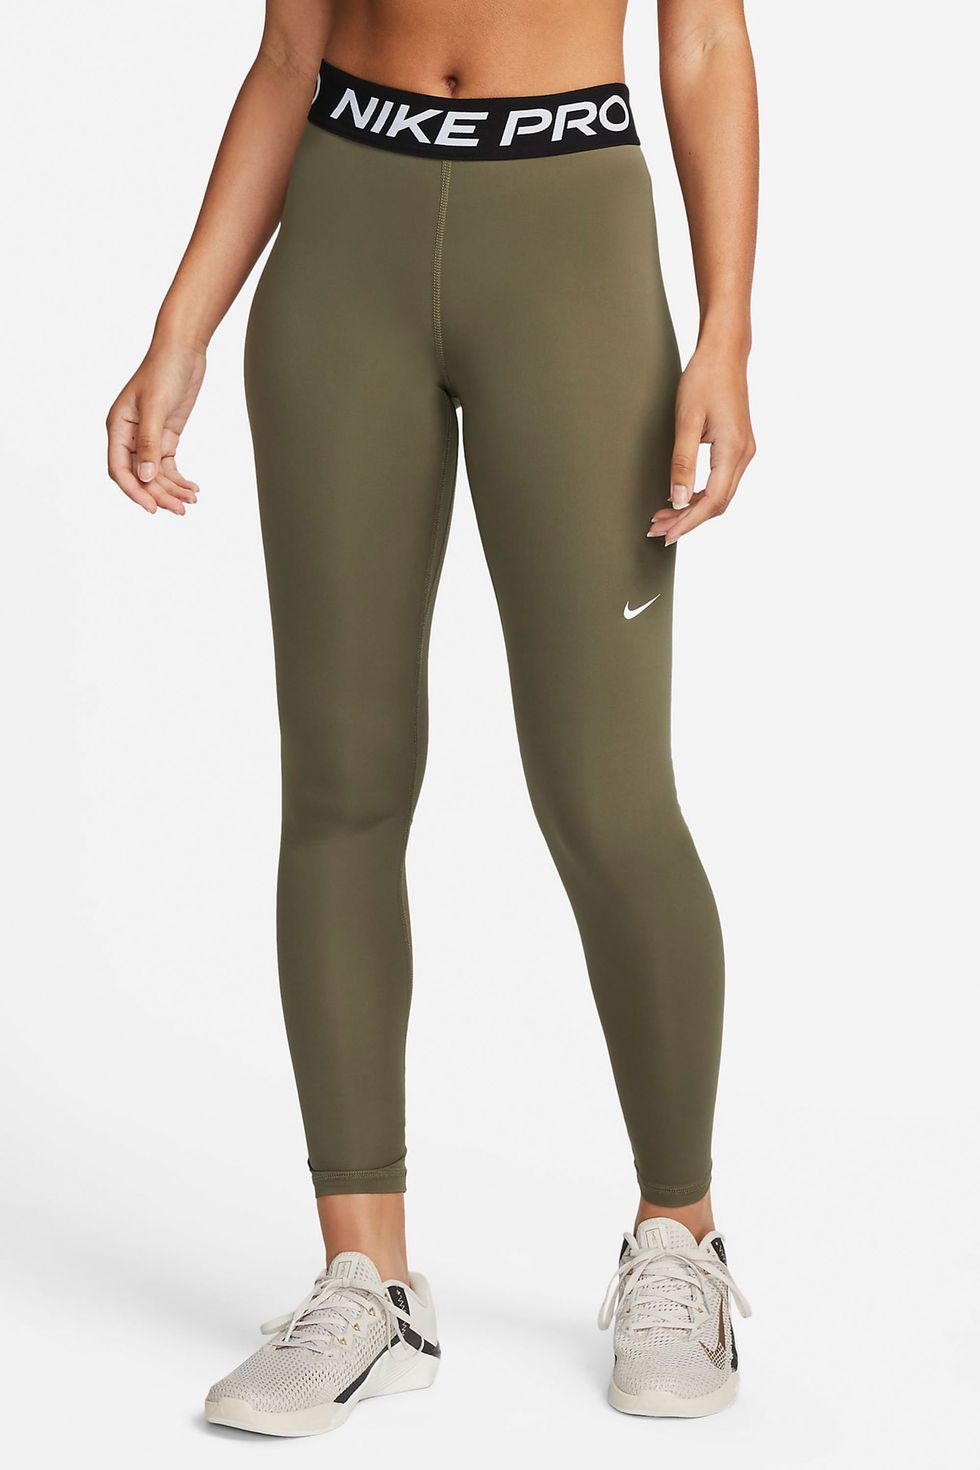 Leggings Review: In Search Of The Perfect Leggings That Won't Slip Down -  Rosie Gonzalez Group